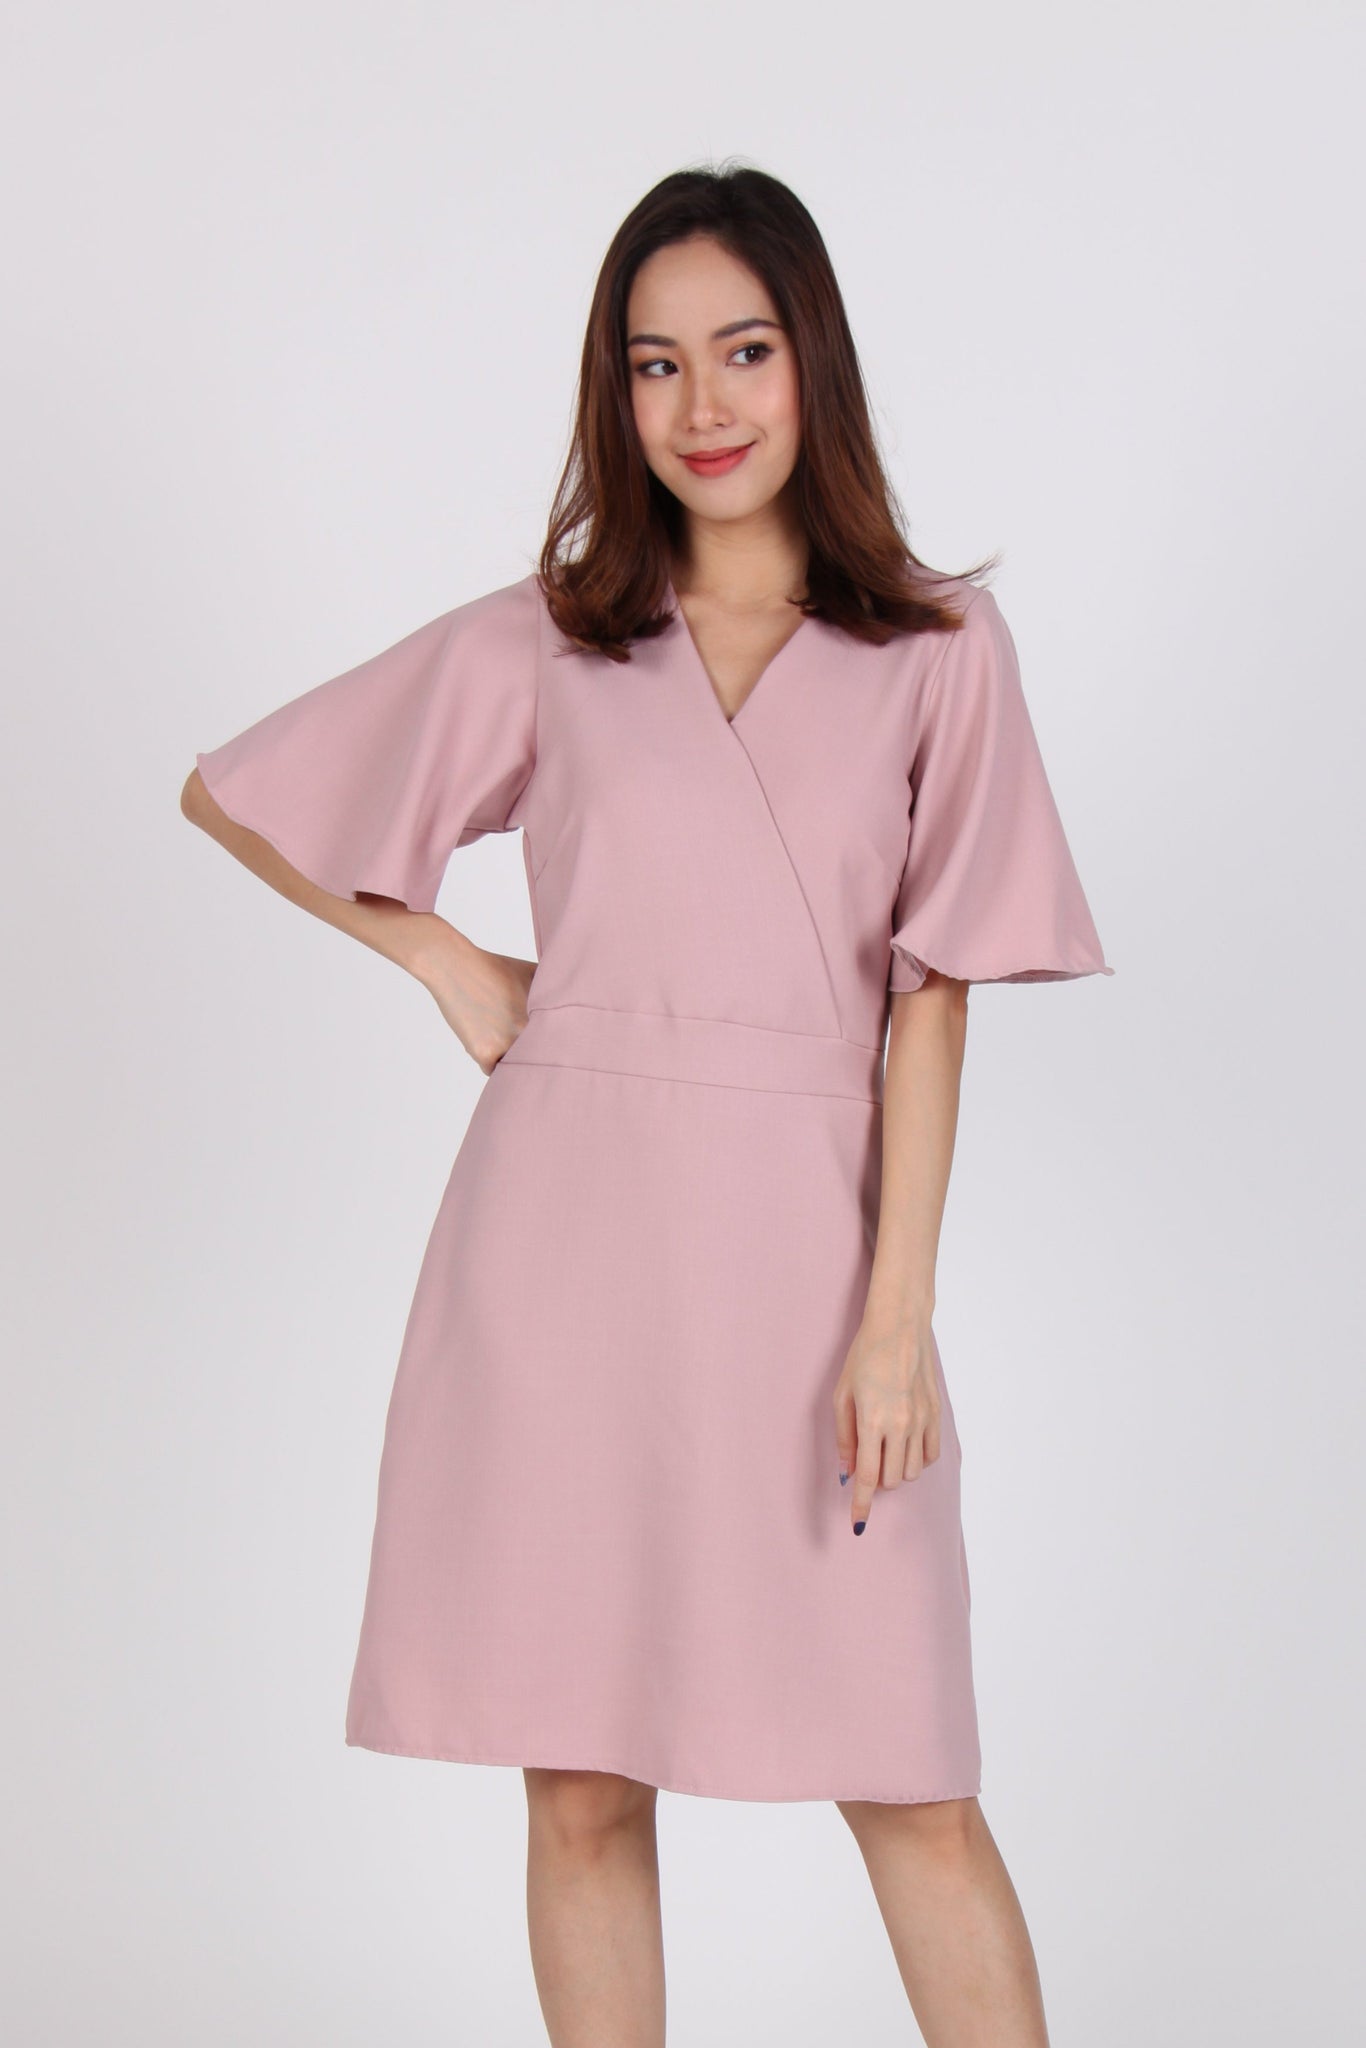 Bell Sleeves Wrap Front Dress in Pink